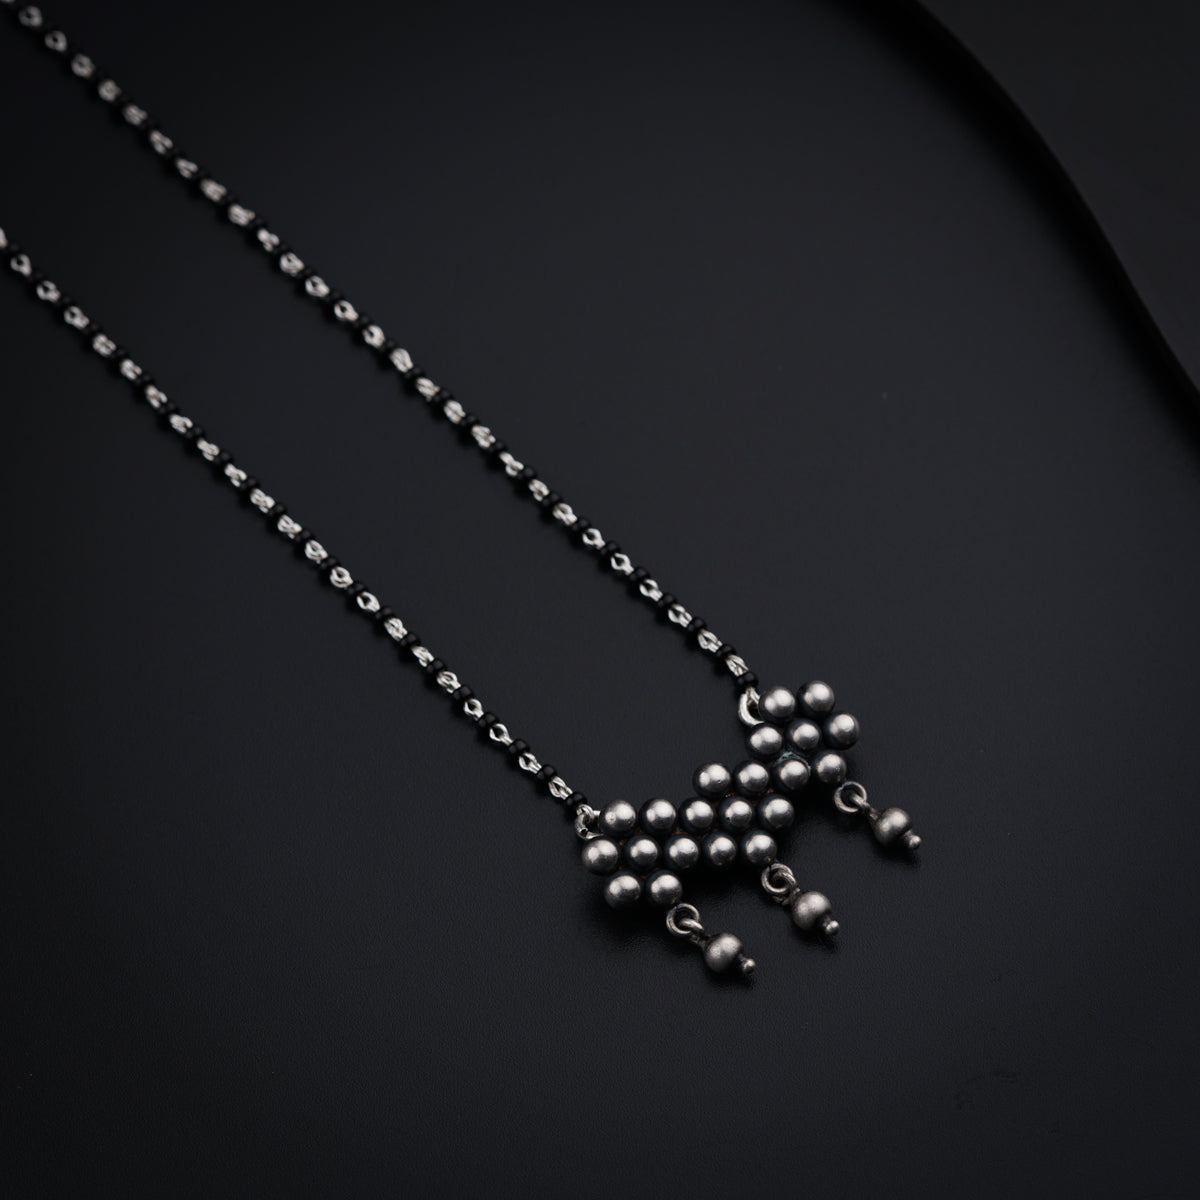 a black background with a silver ball chain